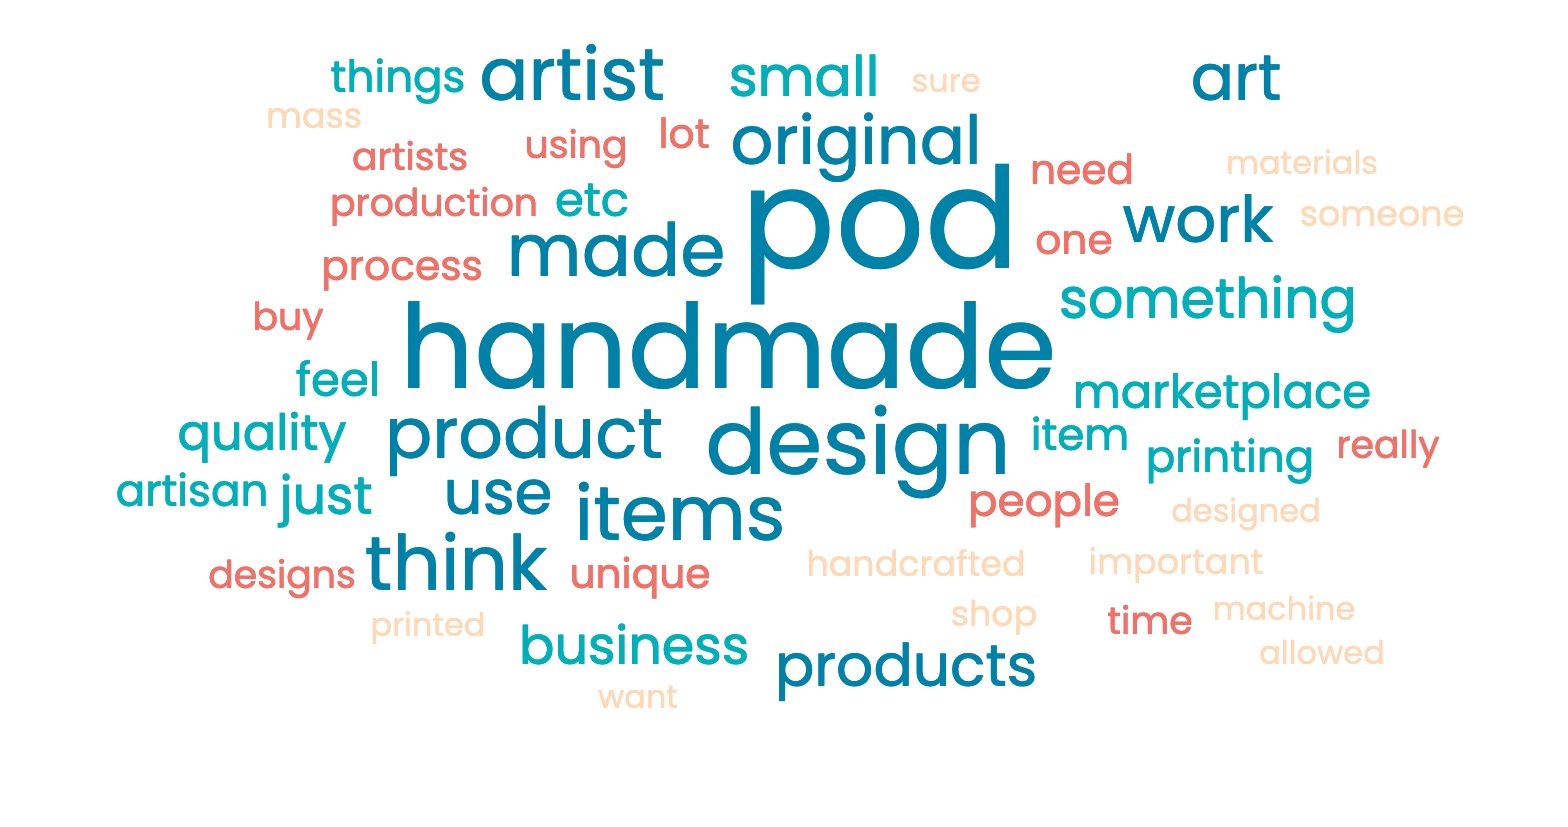 Word Cloud graphic of the most-used words from the handmade survey. Most prominent are POD, Handmade, design, and artisan.